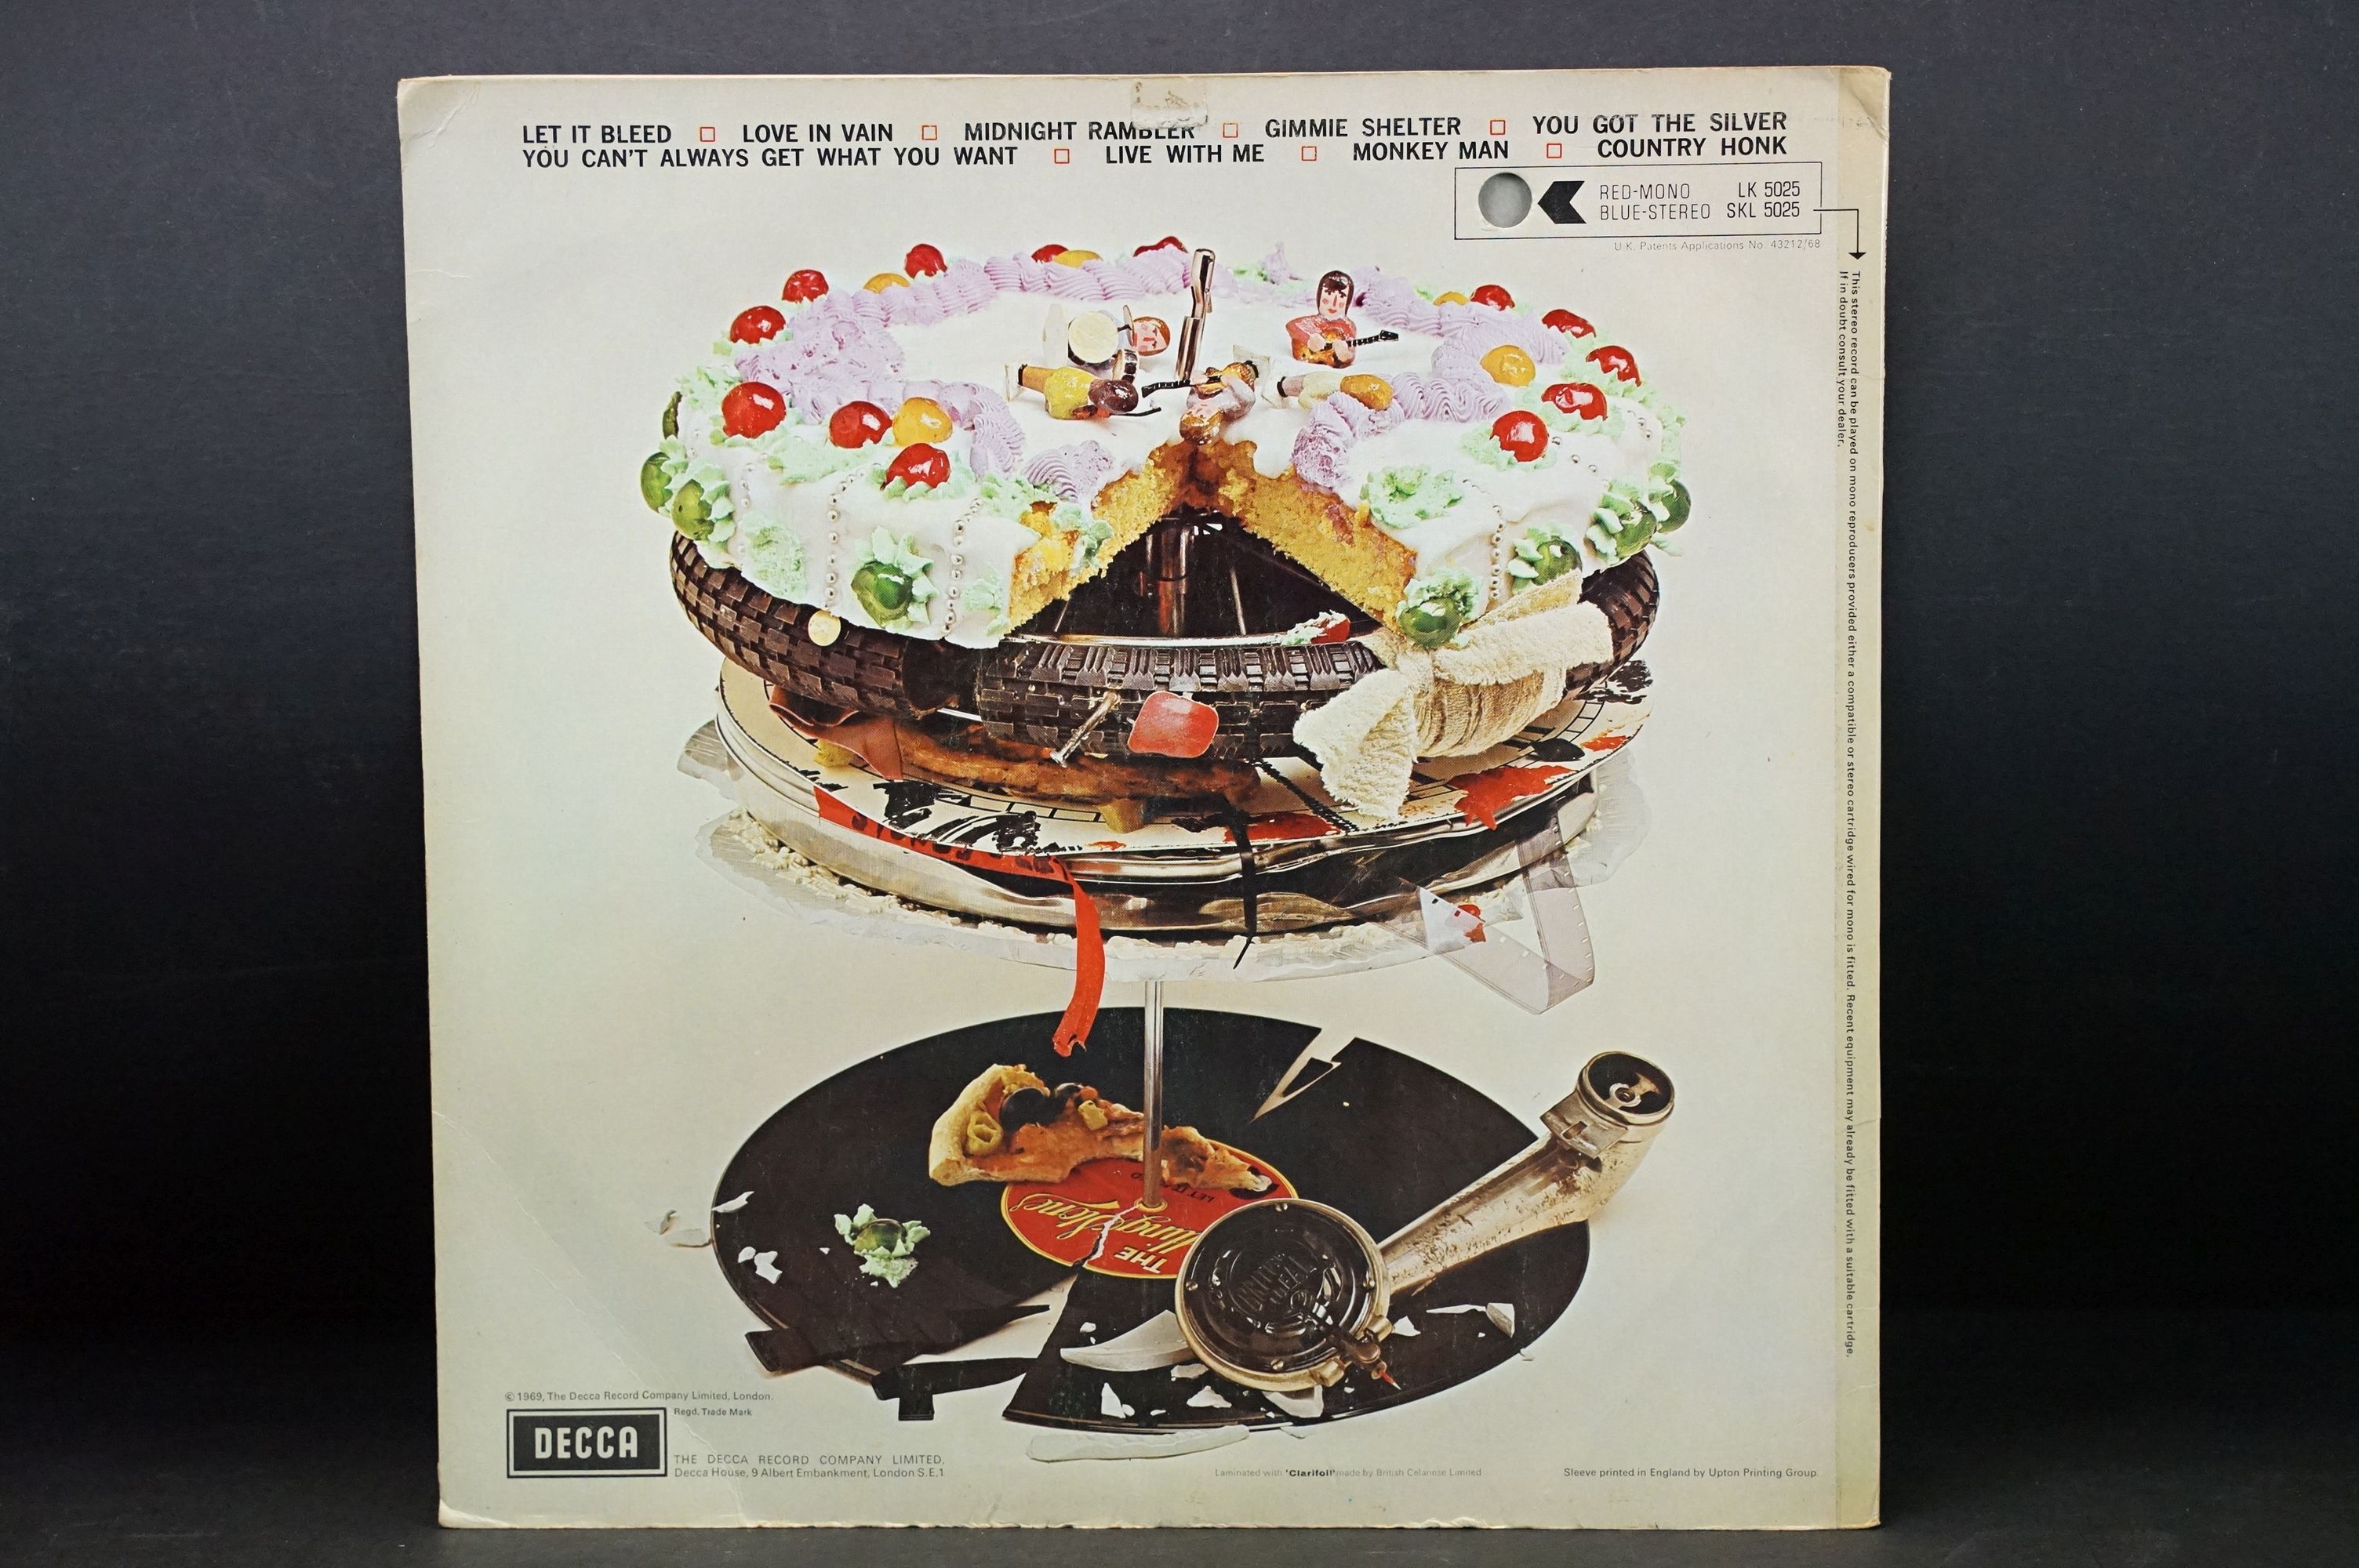 Vinyl - Rolling Stones Let It Bleed on Decca Records LK 5025. Mono pressing with unboxed Decca - Image 6 of 6